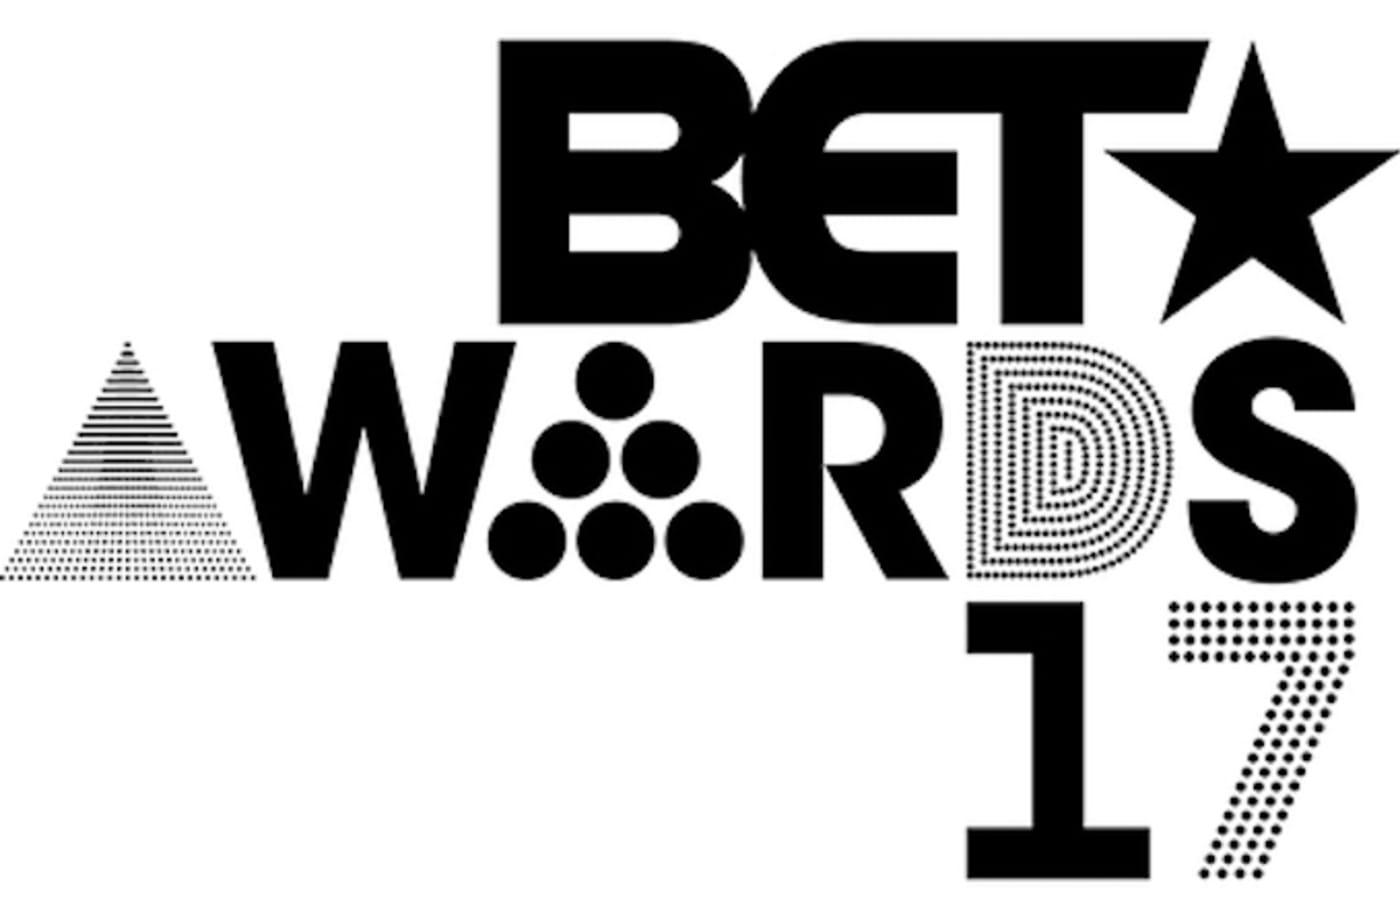 The logo of the 2017 BET Awards.